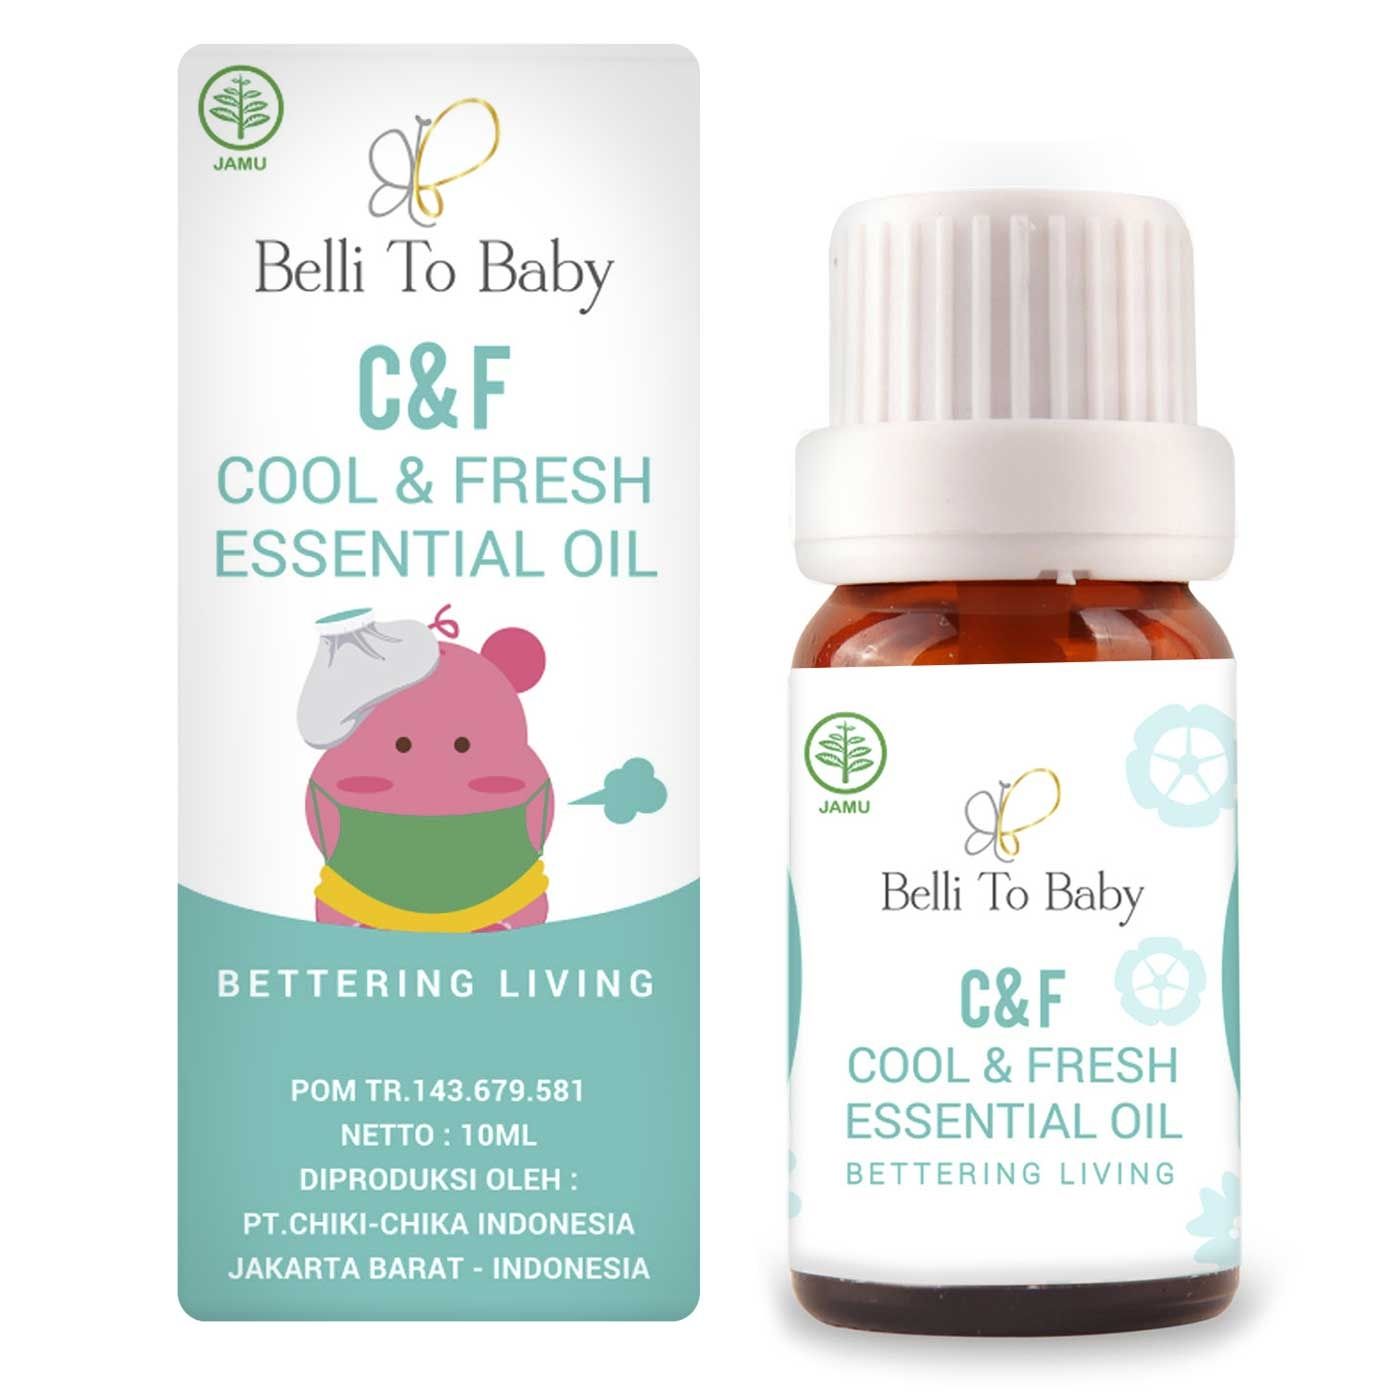 Belli To Baby Essential Oil Cool & Fresh 10ml - 5